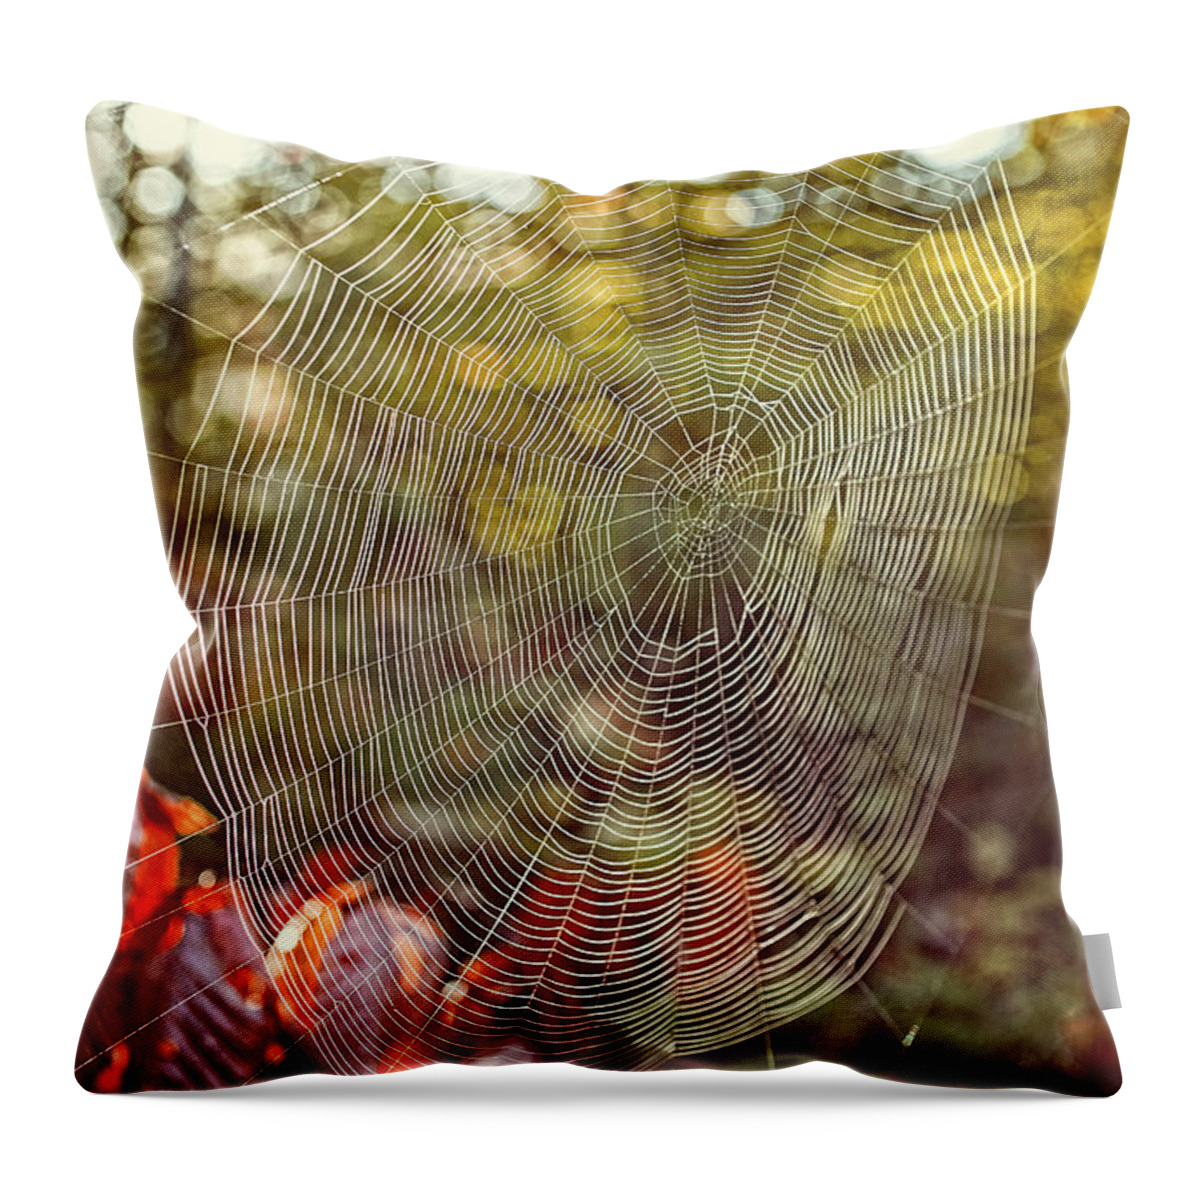 Background Throw Pillow featuring the photograph Spider Web by Edward Fielding